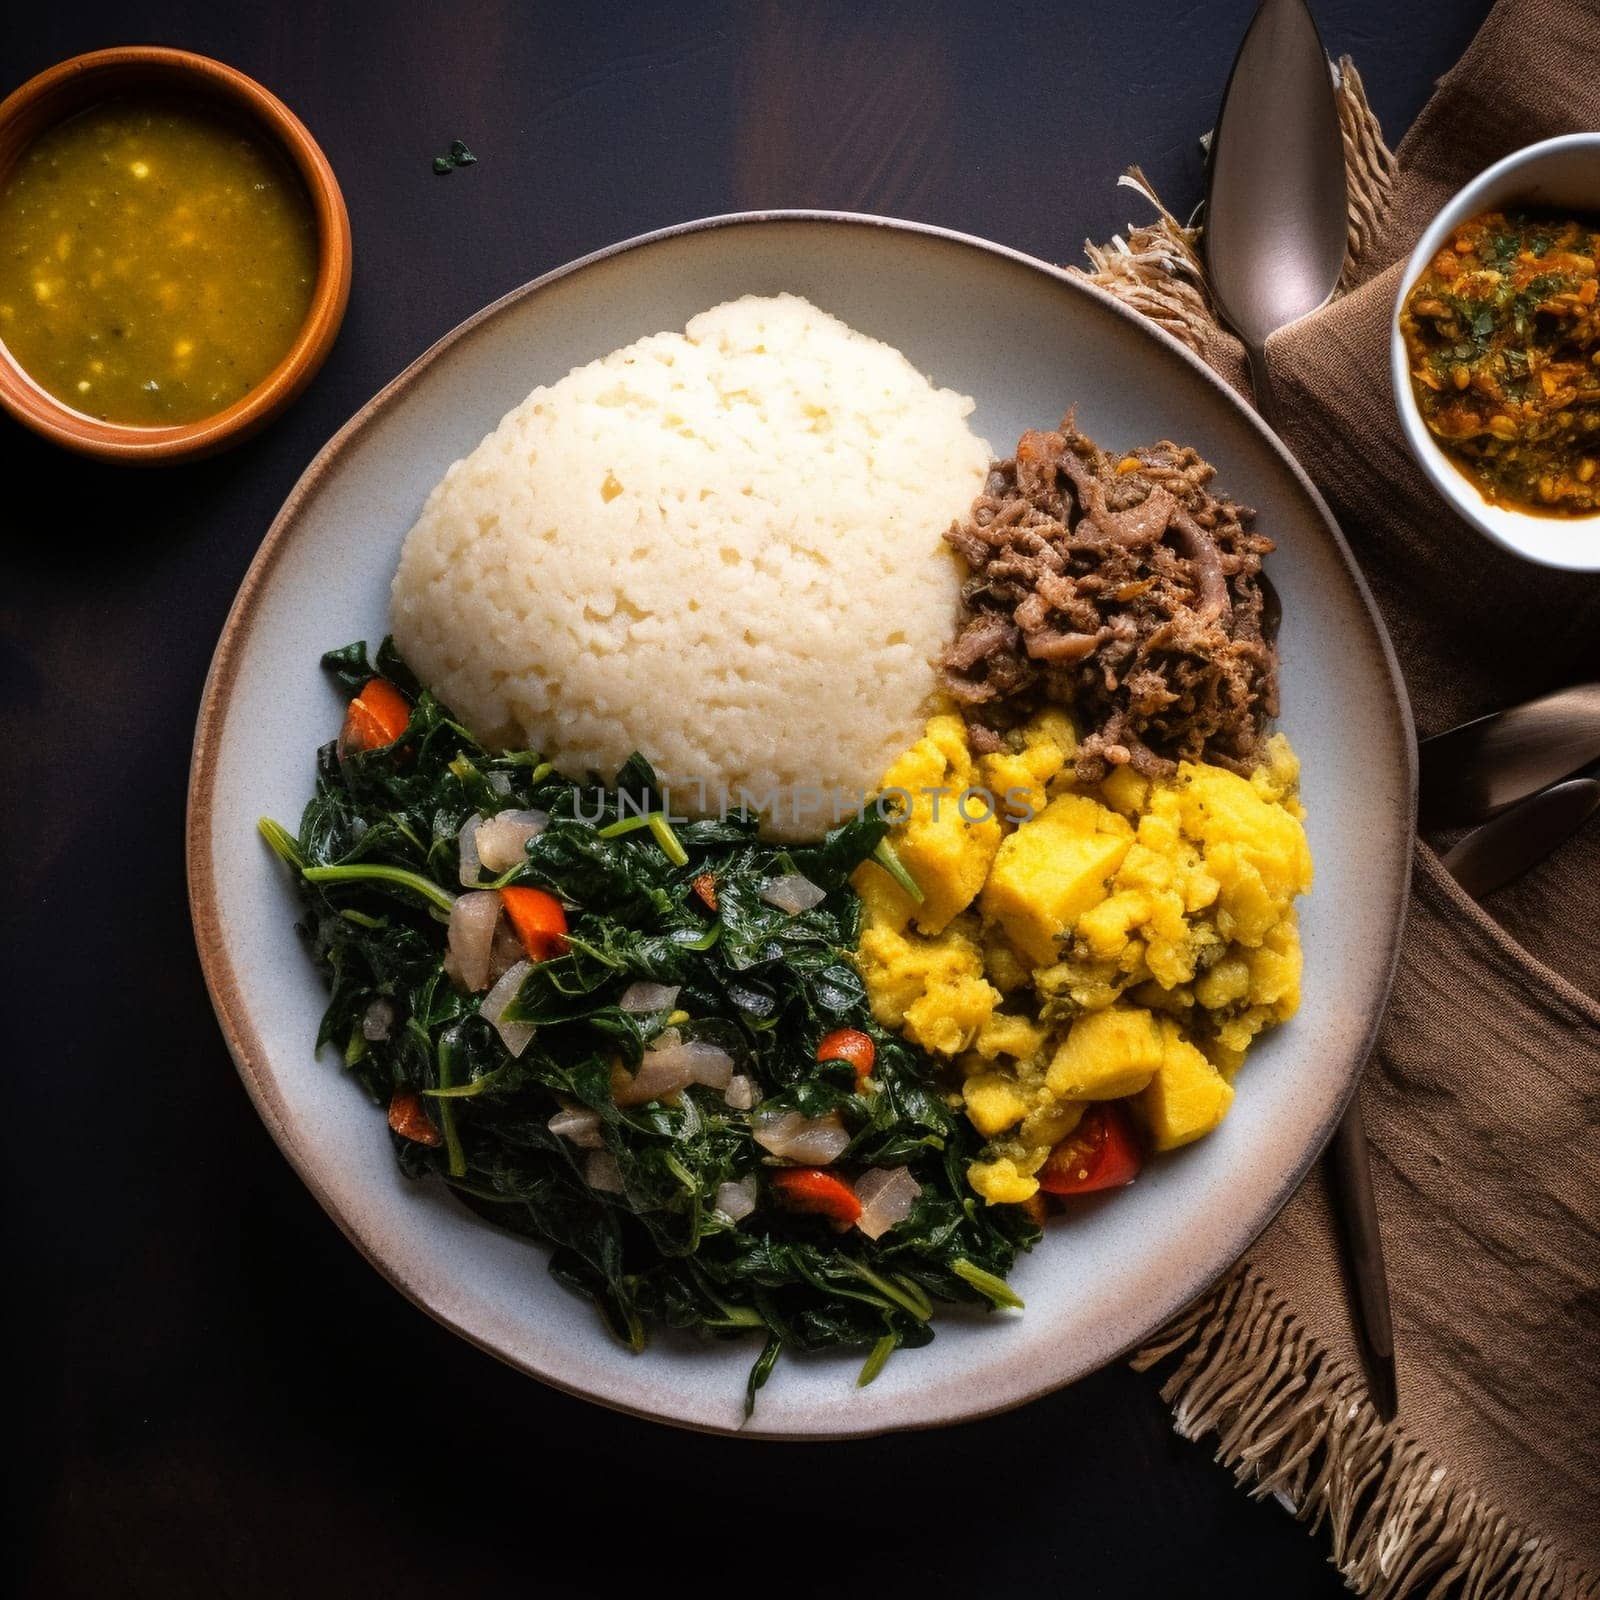 Savor the simple yet delicious flavors of Rwanda's Ugali with Isombe, a cornmeal porridge with cassava leaves. This image showcases the plate of Ugali with Isombe as the main focus, captured from a top-down perspective with a tight framing that highlights the variety of colorful ingredients and their vivid colors. The plate is placed on a traditional Rwandan plate or mat, evoking a sense of authenticity and cultural significance. Around the main dish, smaller bowls containing additional Rwandan dishes or condiments, such as beans or banana beer, add to the overall presentation. The lighting is natural and indirect, streaming in from one side, casting soft shadows that accentuate the textures and colors of the ingredients. The image evokes a sense of simplicity, comfort, and tradition, inviting the viewer to enjoy a humble and nourishing African meal. Emphasize the smooth and slightly grainy texture of the Ugali, as well as the flavors and aromas of the cassava leaves. Traditional Rwandan ingredients such as peanuts, chilies, and ginger add more visual interest and showcase the unique flavors of the dish.